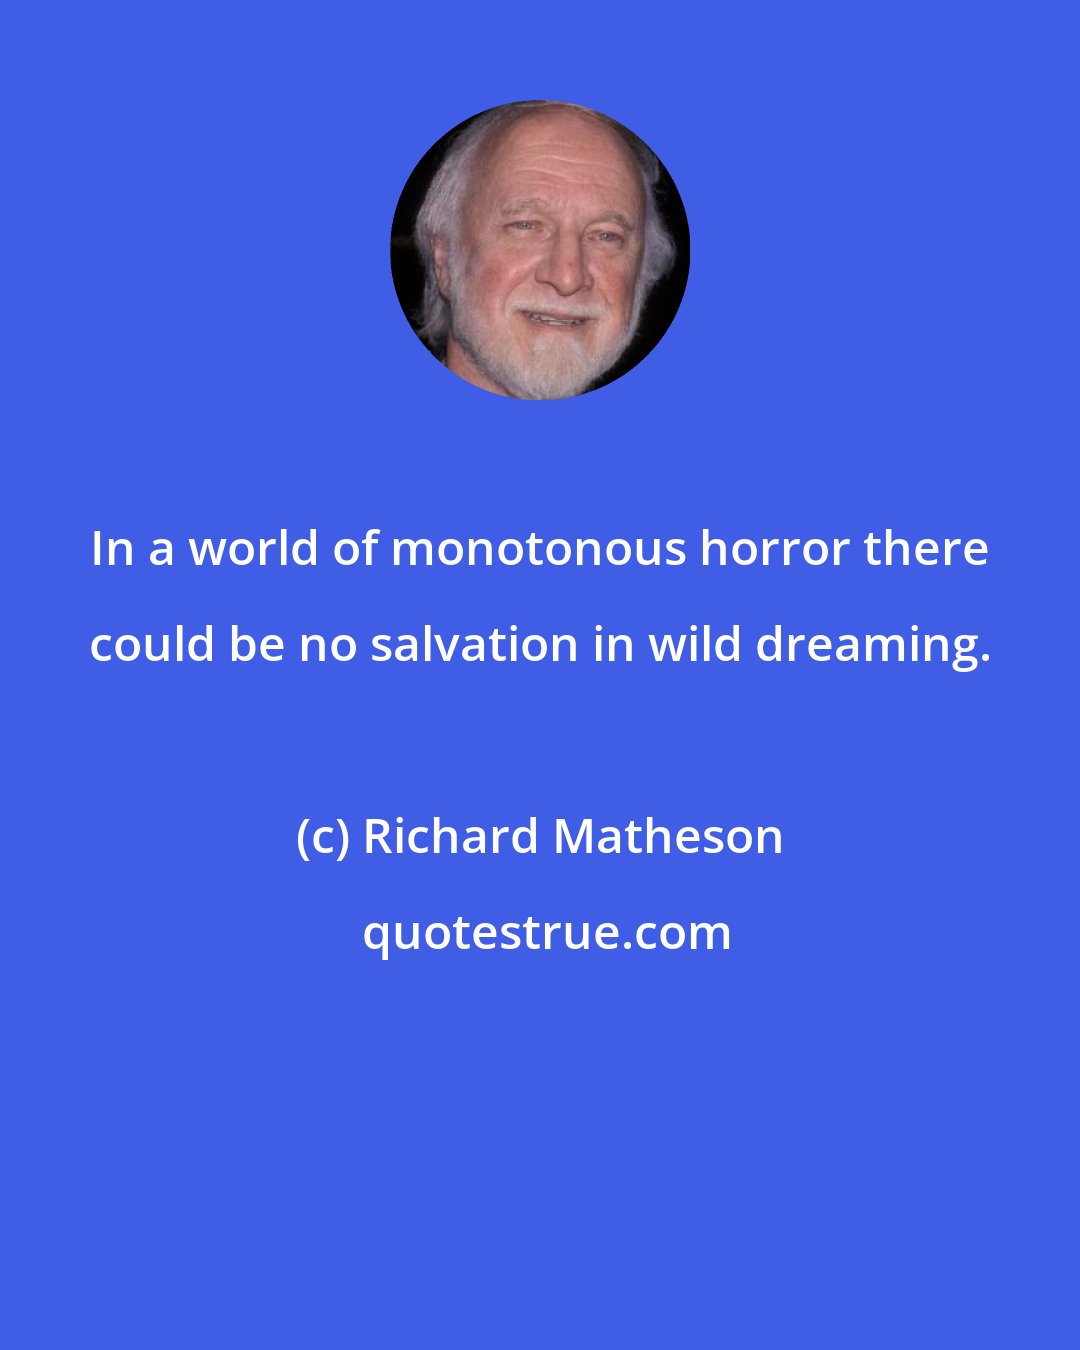 Richard Matheson: In a world of monotonous horror there could be no salvation in wild dreaming.